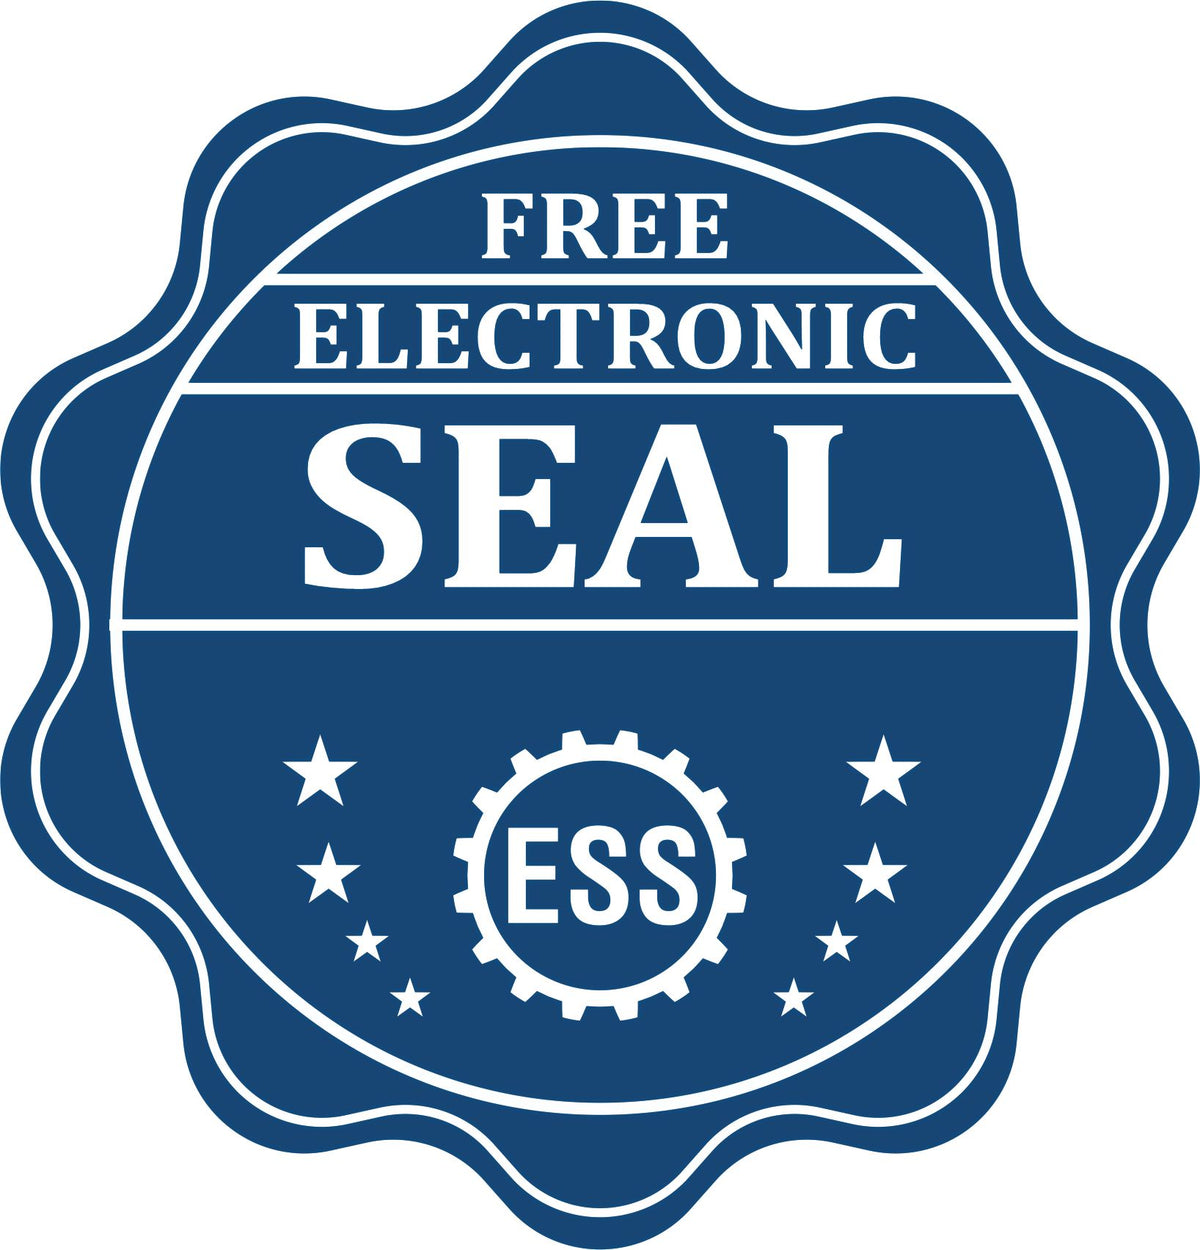 A badge showing a free electronic seal for the Hawaii Geologist Desk Seal with stars and the ESS gear on the emblem.